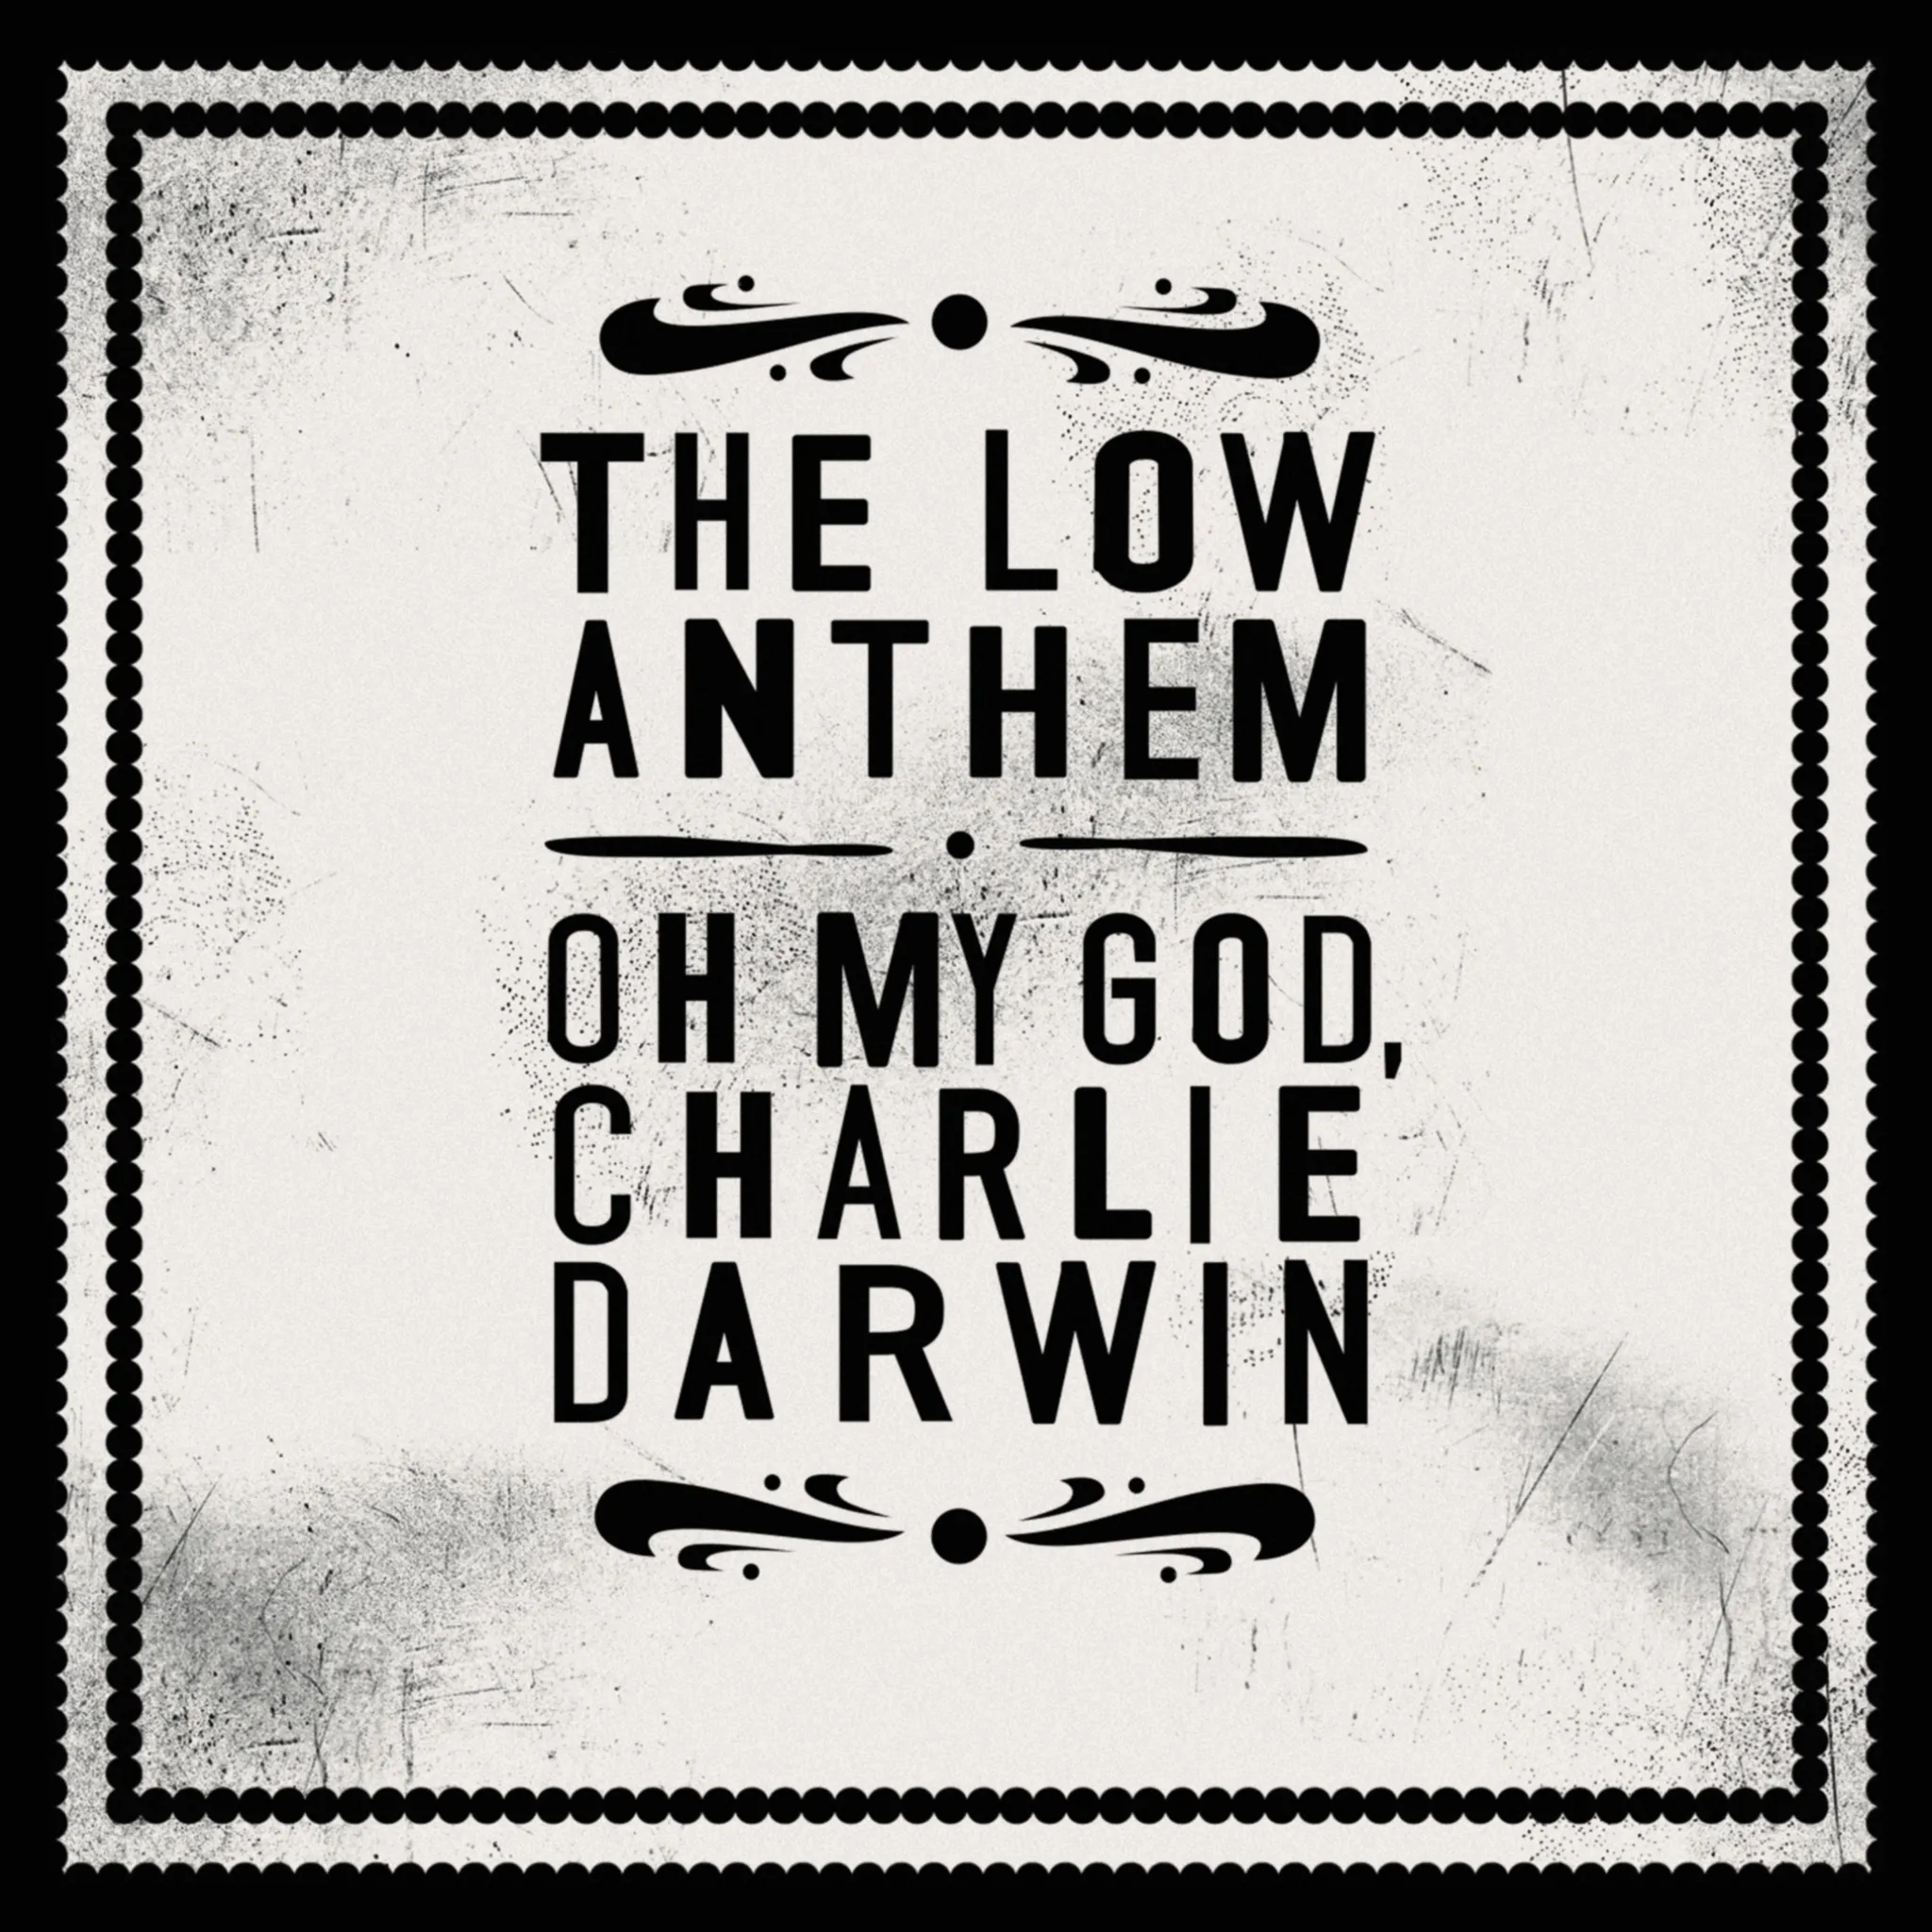 <strong>The Low Anthem - Oh My God, Charlie Darwin - 10th Anniversary</strong> (Vinyl LP - green)